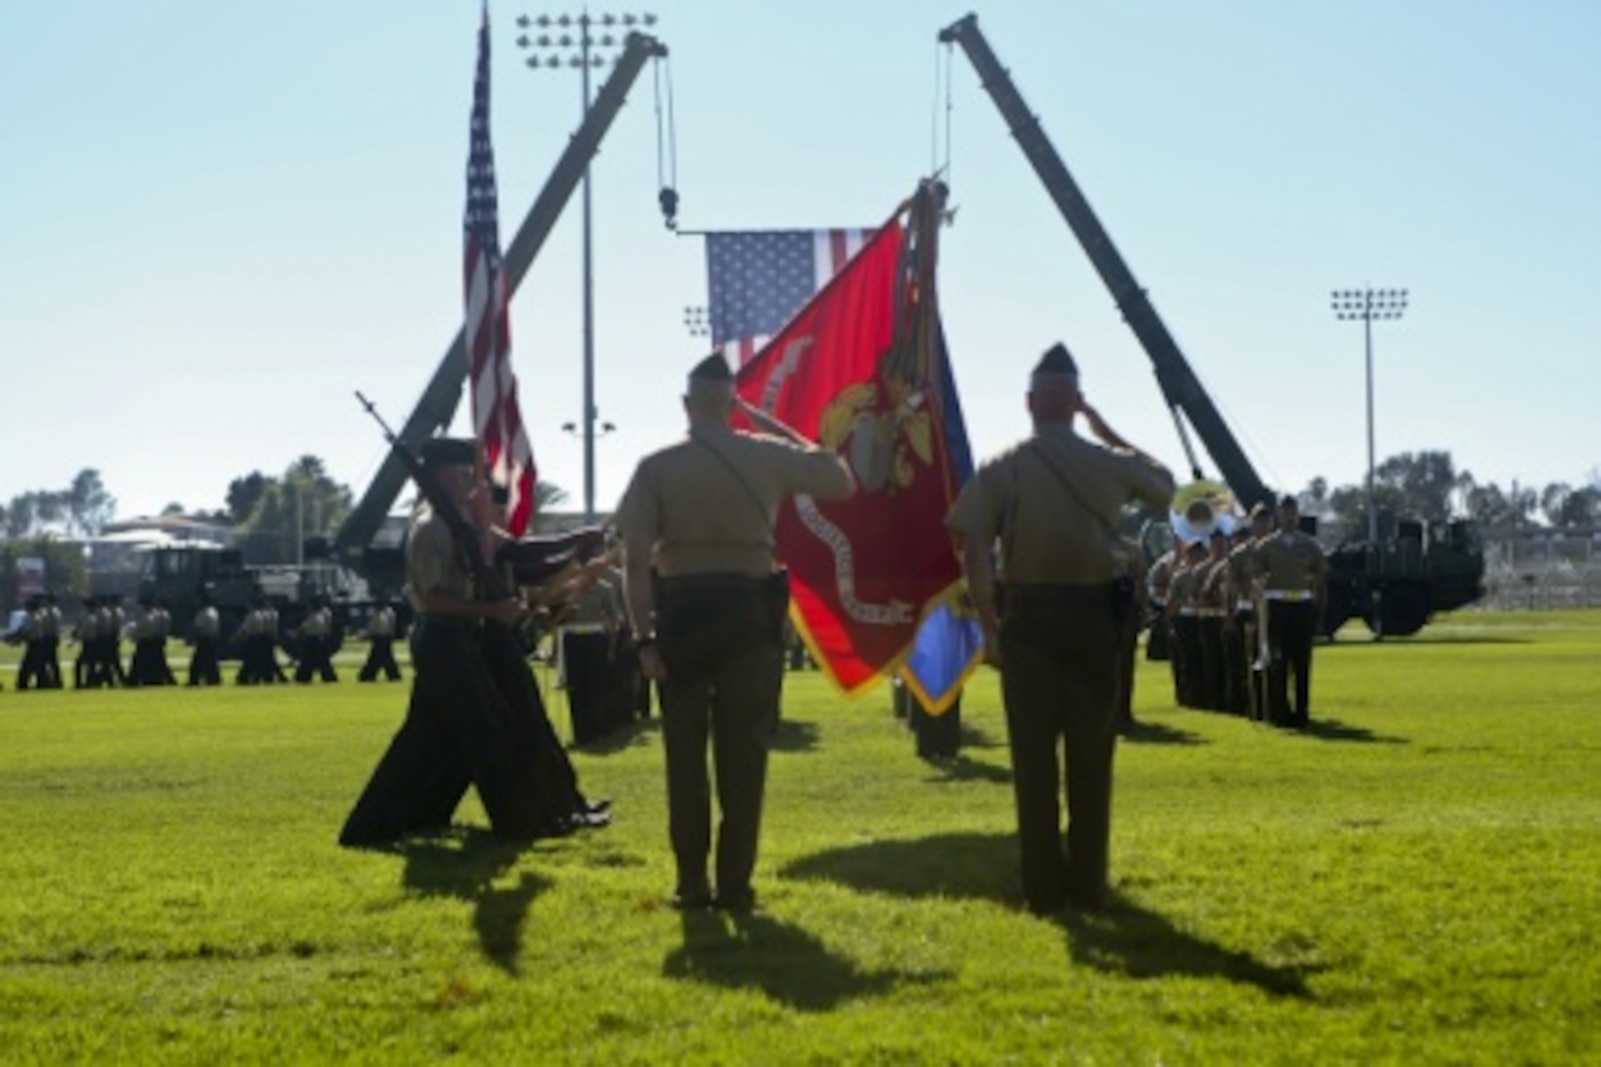 U.S. Marine Maj. General Vincent A. Coglinese, 1st Marine Logistics Group (1st MLG), and Brig. Gen. David A Ottignon render honors to colors during the pass in review of the 1st Marine Logistics Group Change of Command Ceremony aboard Camp Pendleton, Calif., July 24, 2015. The Change of Command for 1st MLG showcased the passing of command from Maj. Gen. Vincent A. Coglinese to Brig. Gen. David a Ottignon. (U.S. Marine Corps photo by Lance Cpl. Lauren Falk/Released)